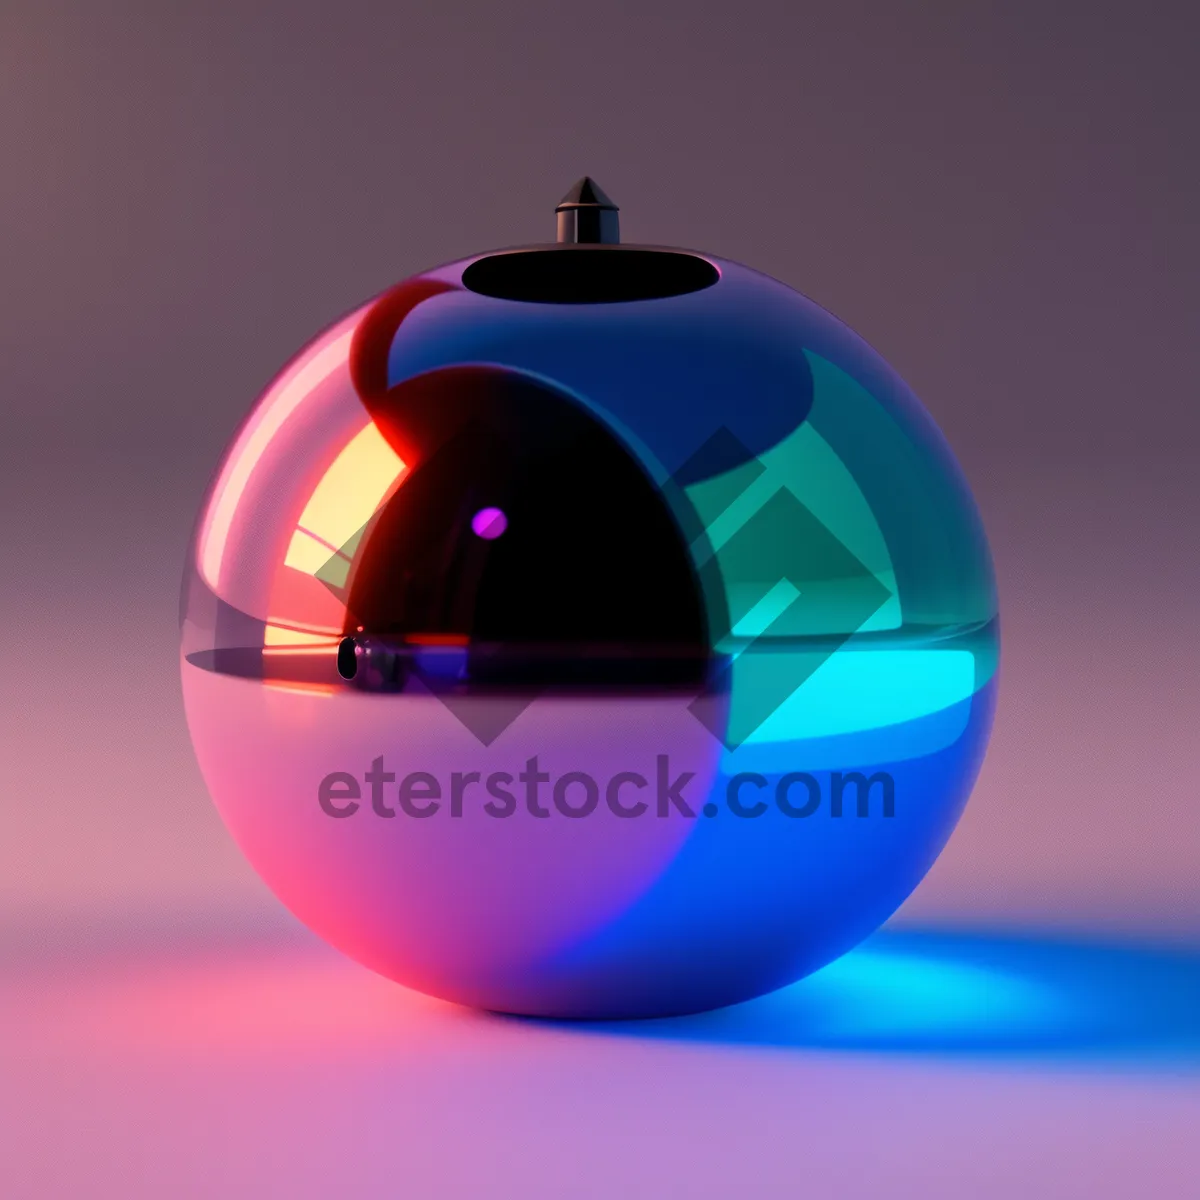 Picture of Glossy Glass Button Icon - Light Sphere